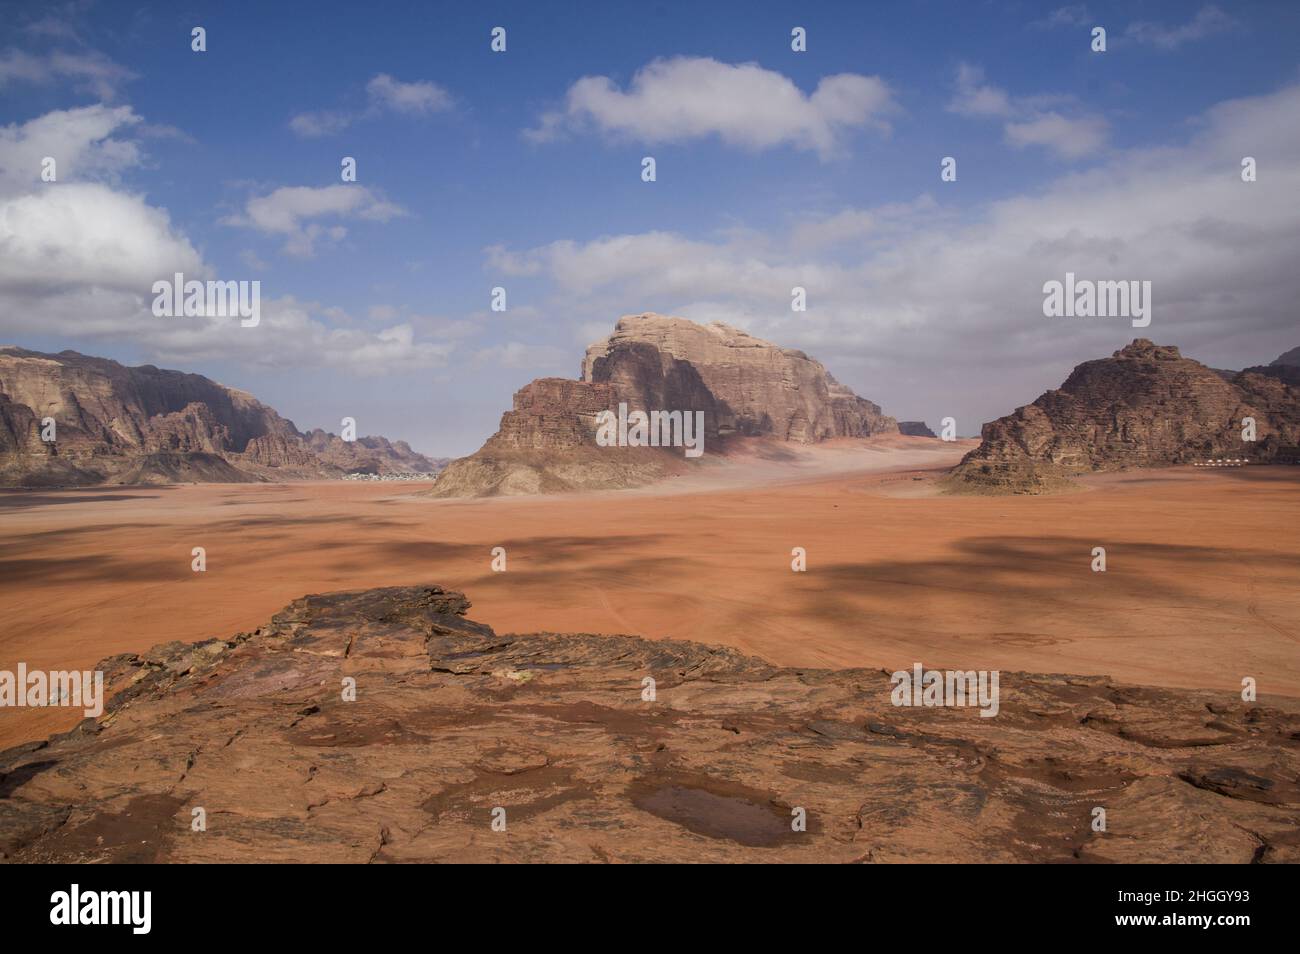 Desert landscape of Wadi Rum, a canyon in Jordan with red sands and cliff walls. Stock Photo